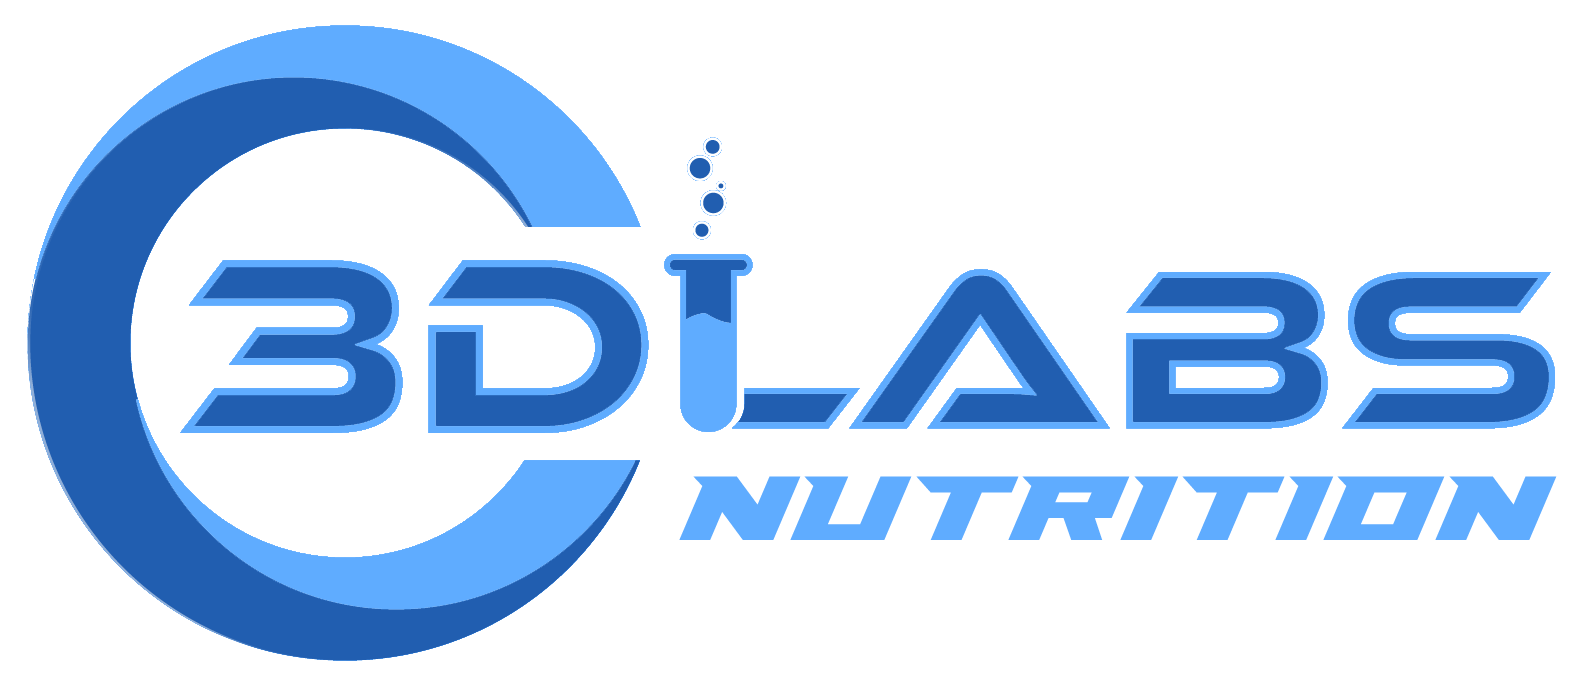 3D Labs Nutrition Coupon Codes